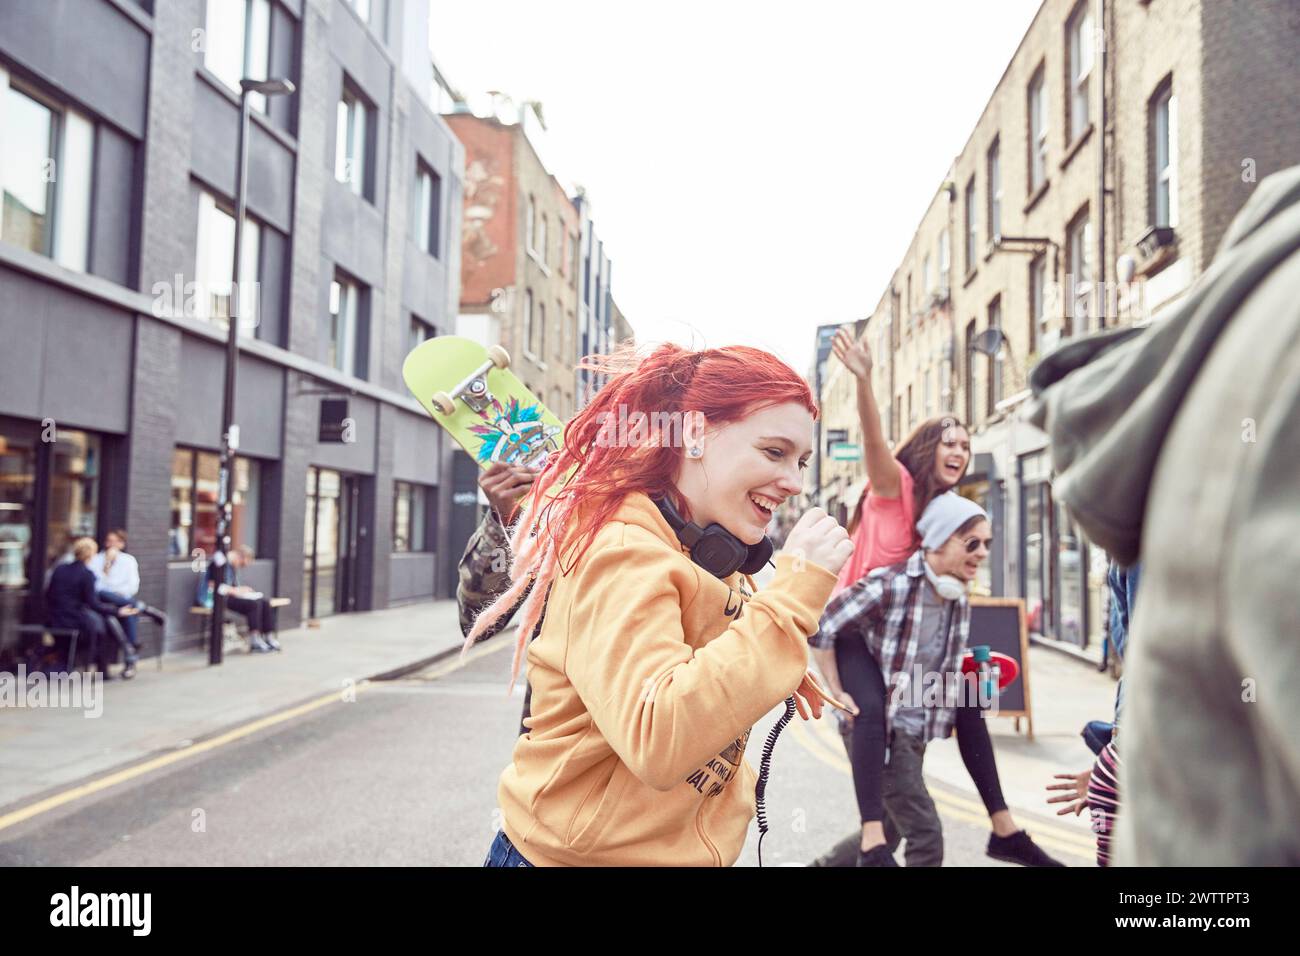 Group of friends enjoying a playful moment on a city street Stock Photo